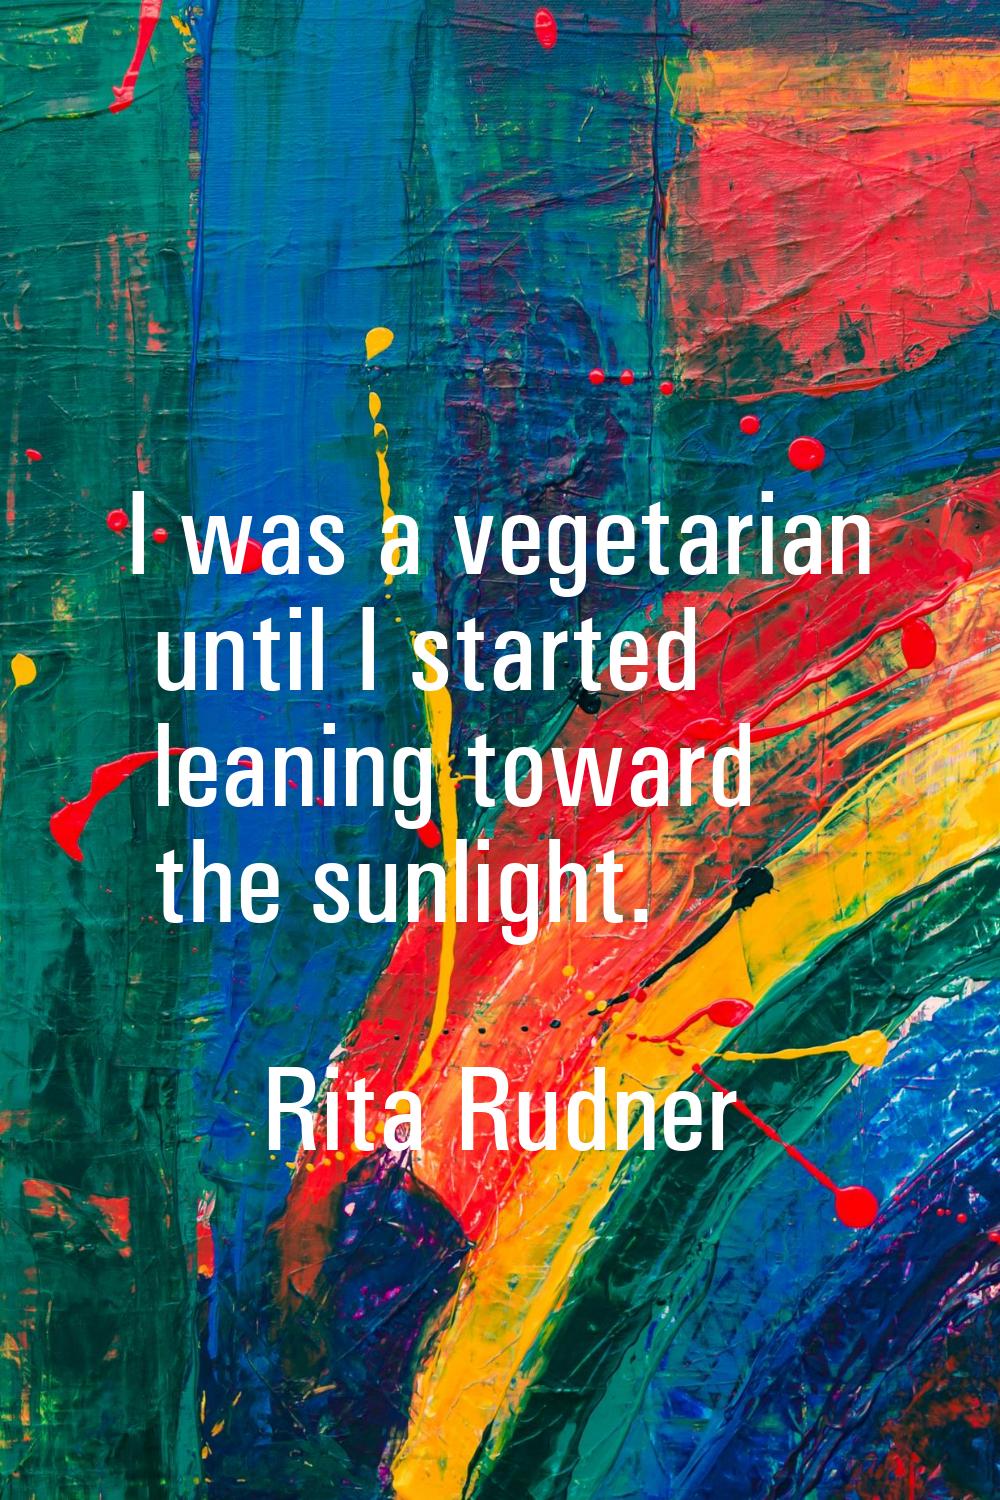 I was a vegetarian until I started leaning toward the sunlight.